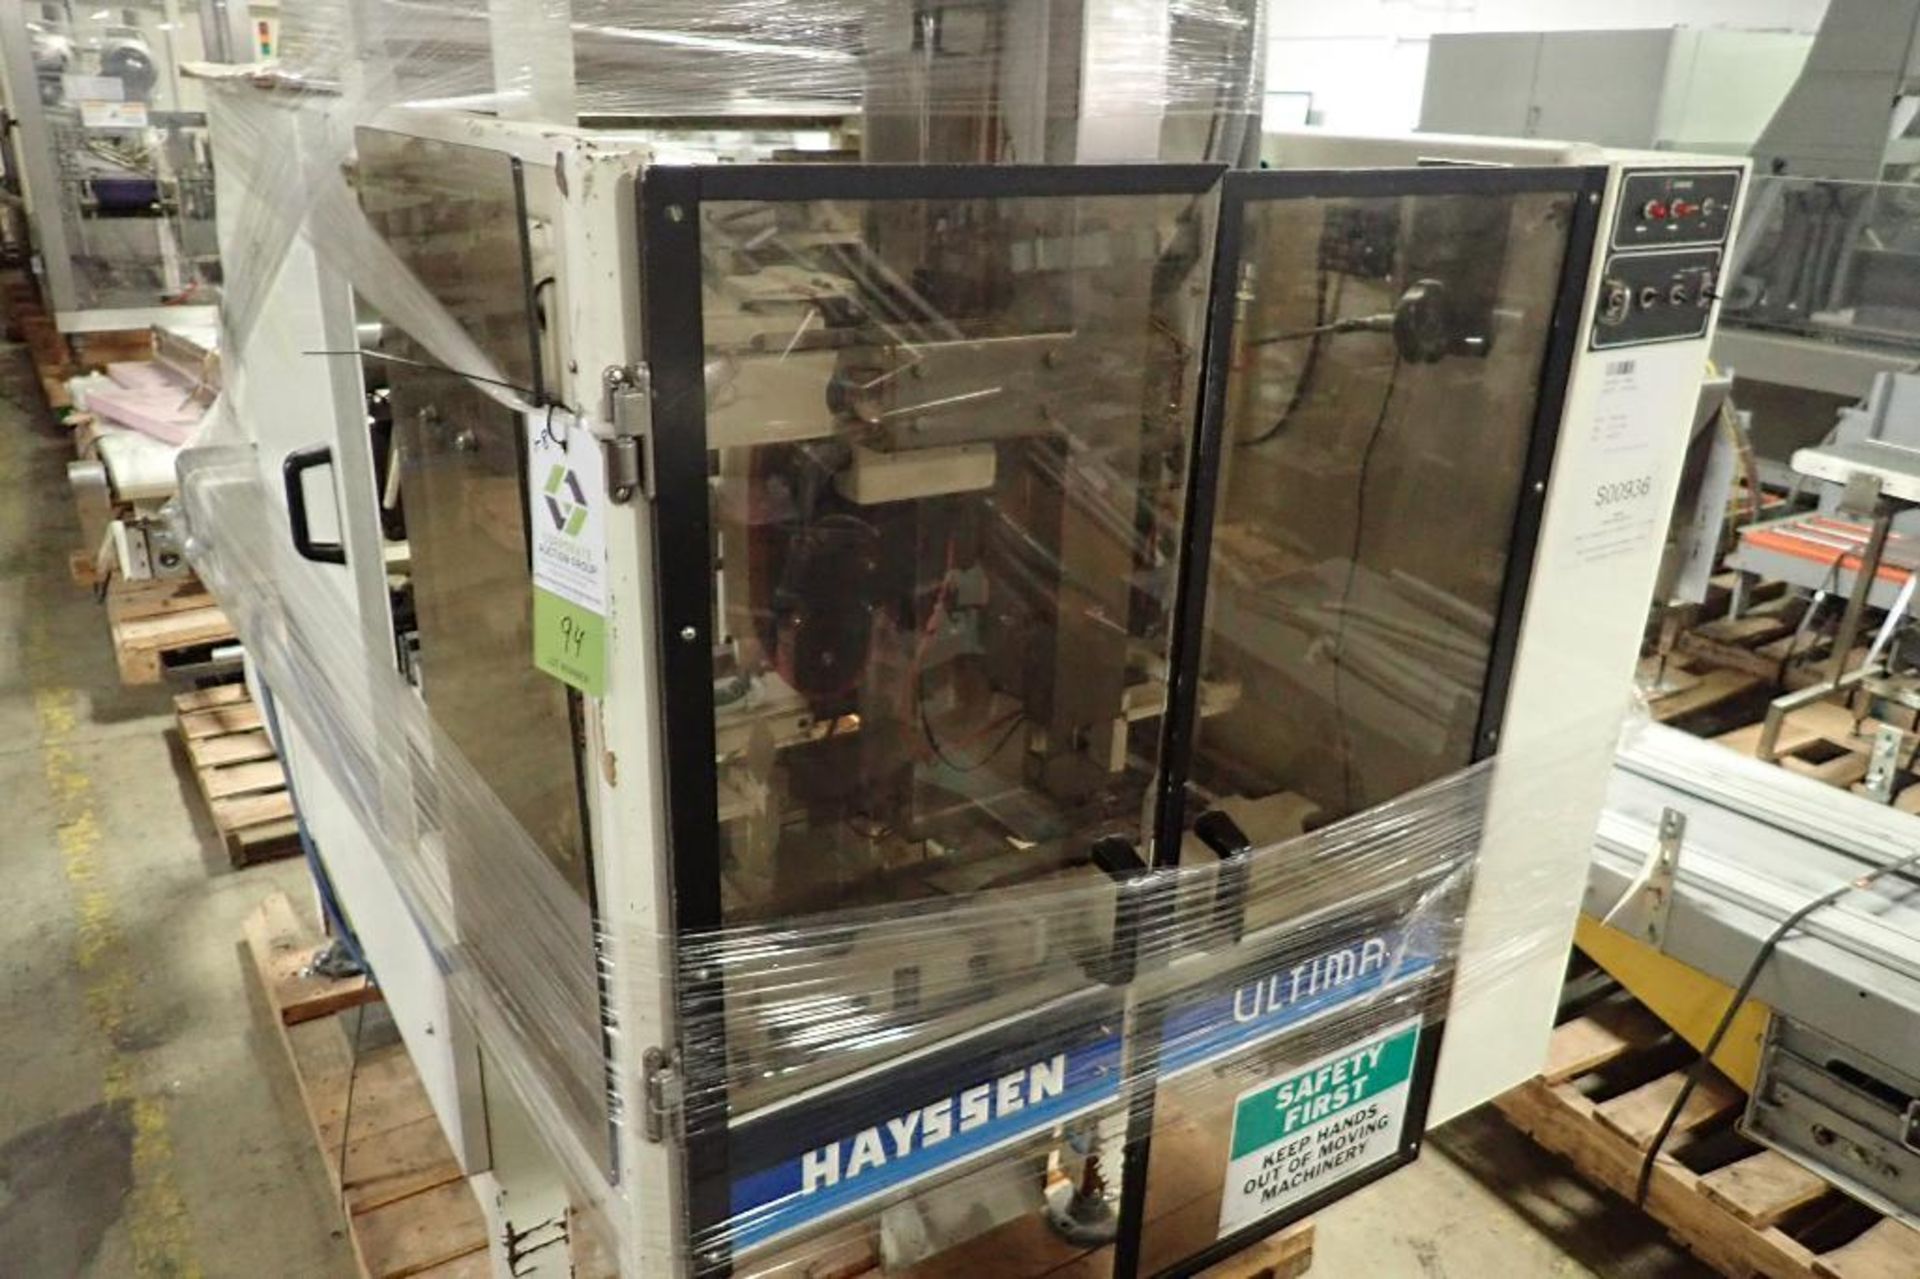 1994 Hayssen Yamato data weigh 8 head scale, Model ADW-508MD, SN 084026/930442, 8 g to 1000 g capaci - Image 15 of 34